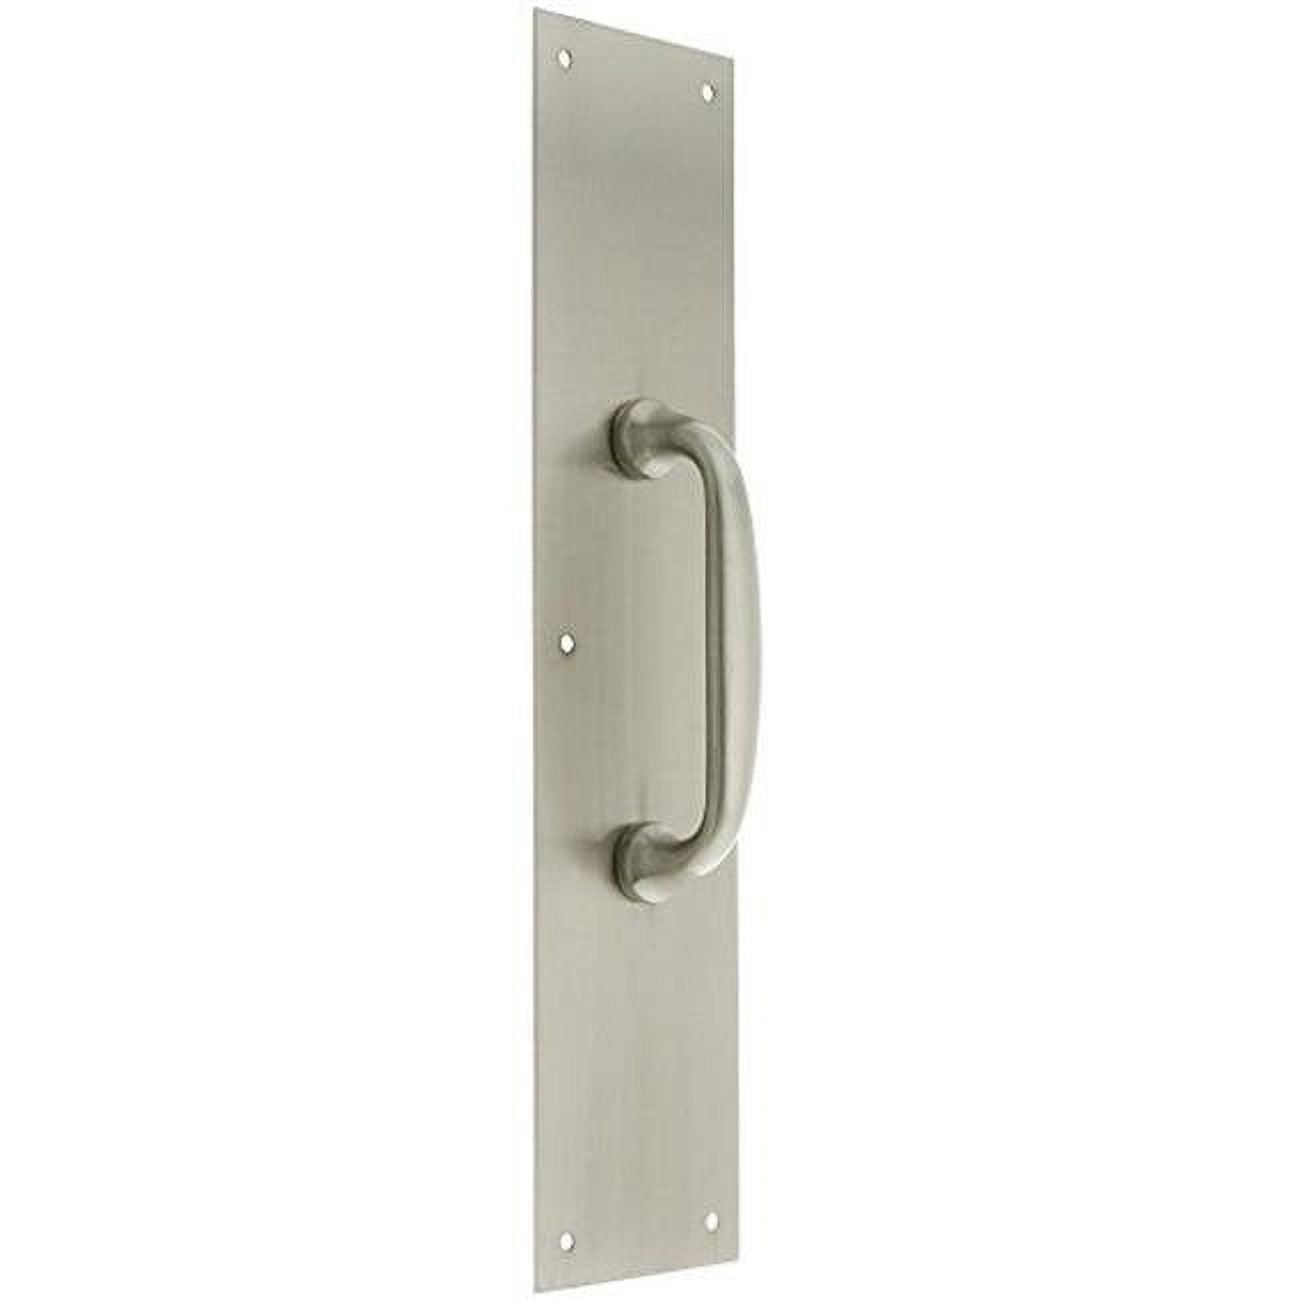 A07-p6321-613pc 3 X 12 In. Push Plate With Pull, Oil Rubbed Bronze